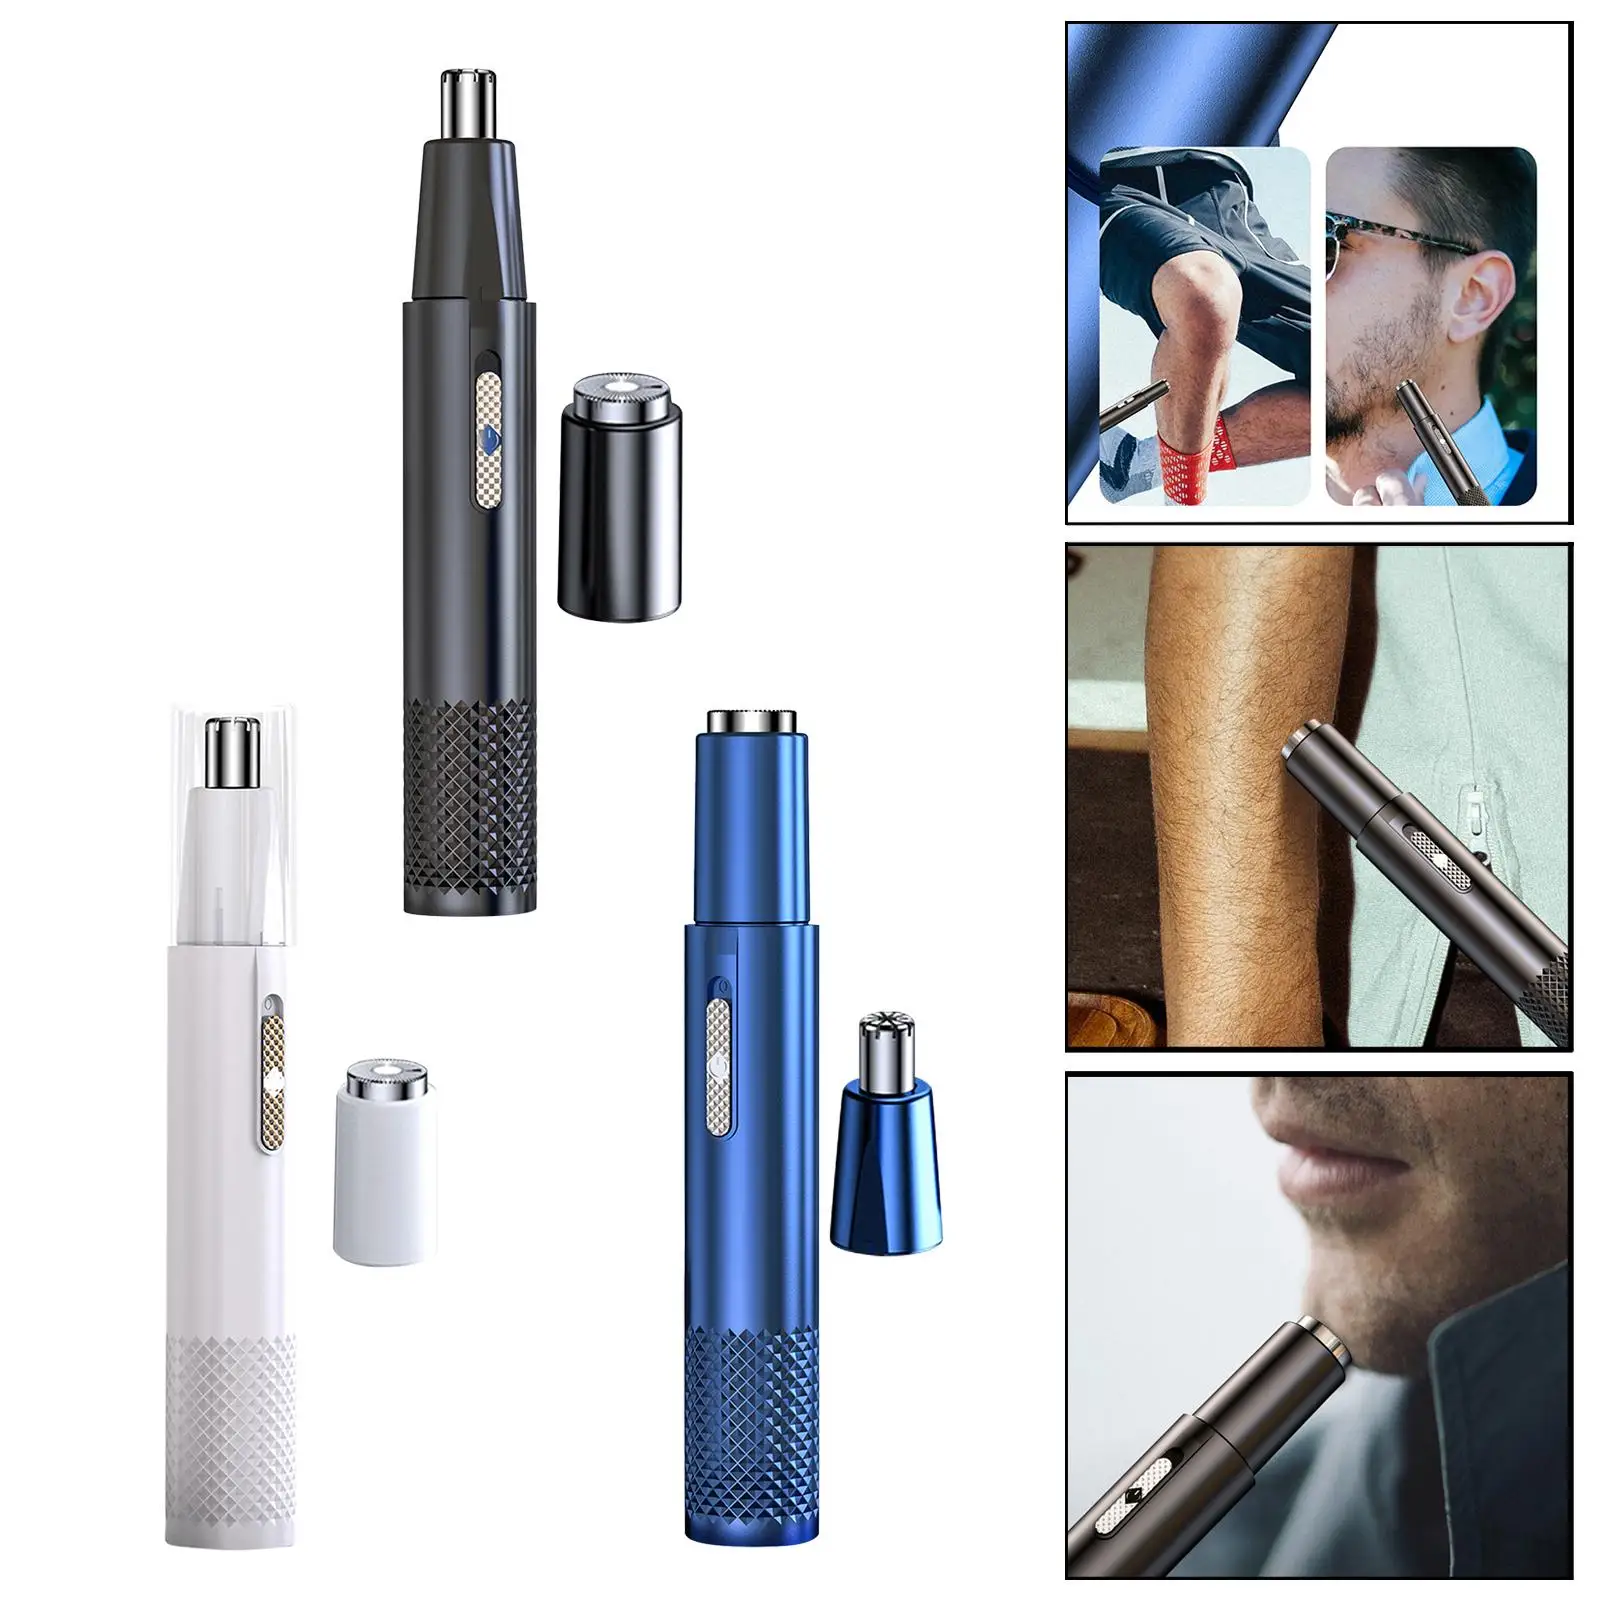 Nose and Ear Hair Trimmer Rechargeable Hypoallergenic for Men